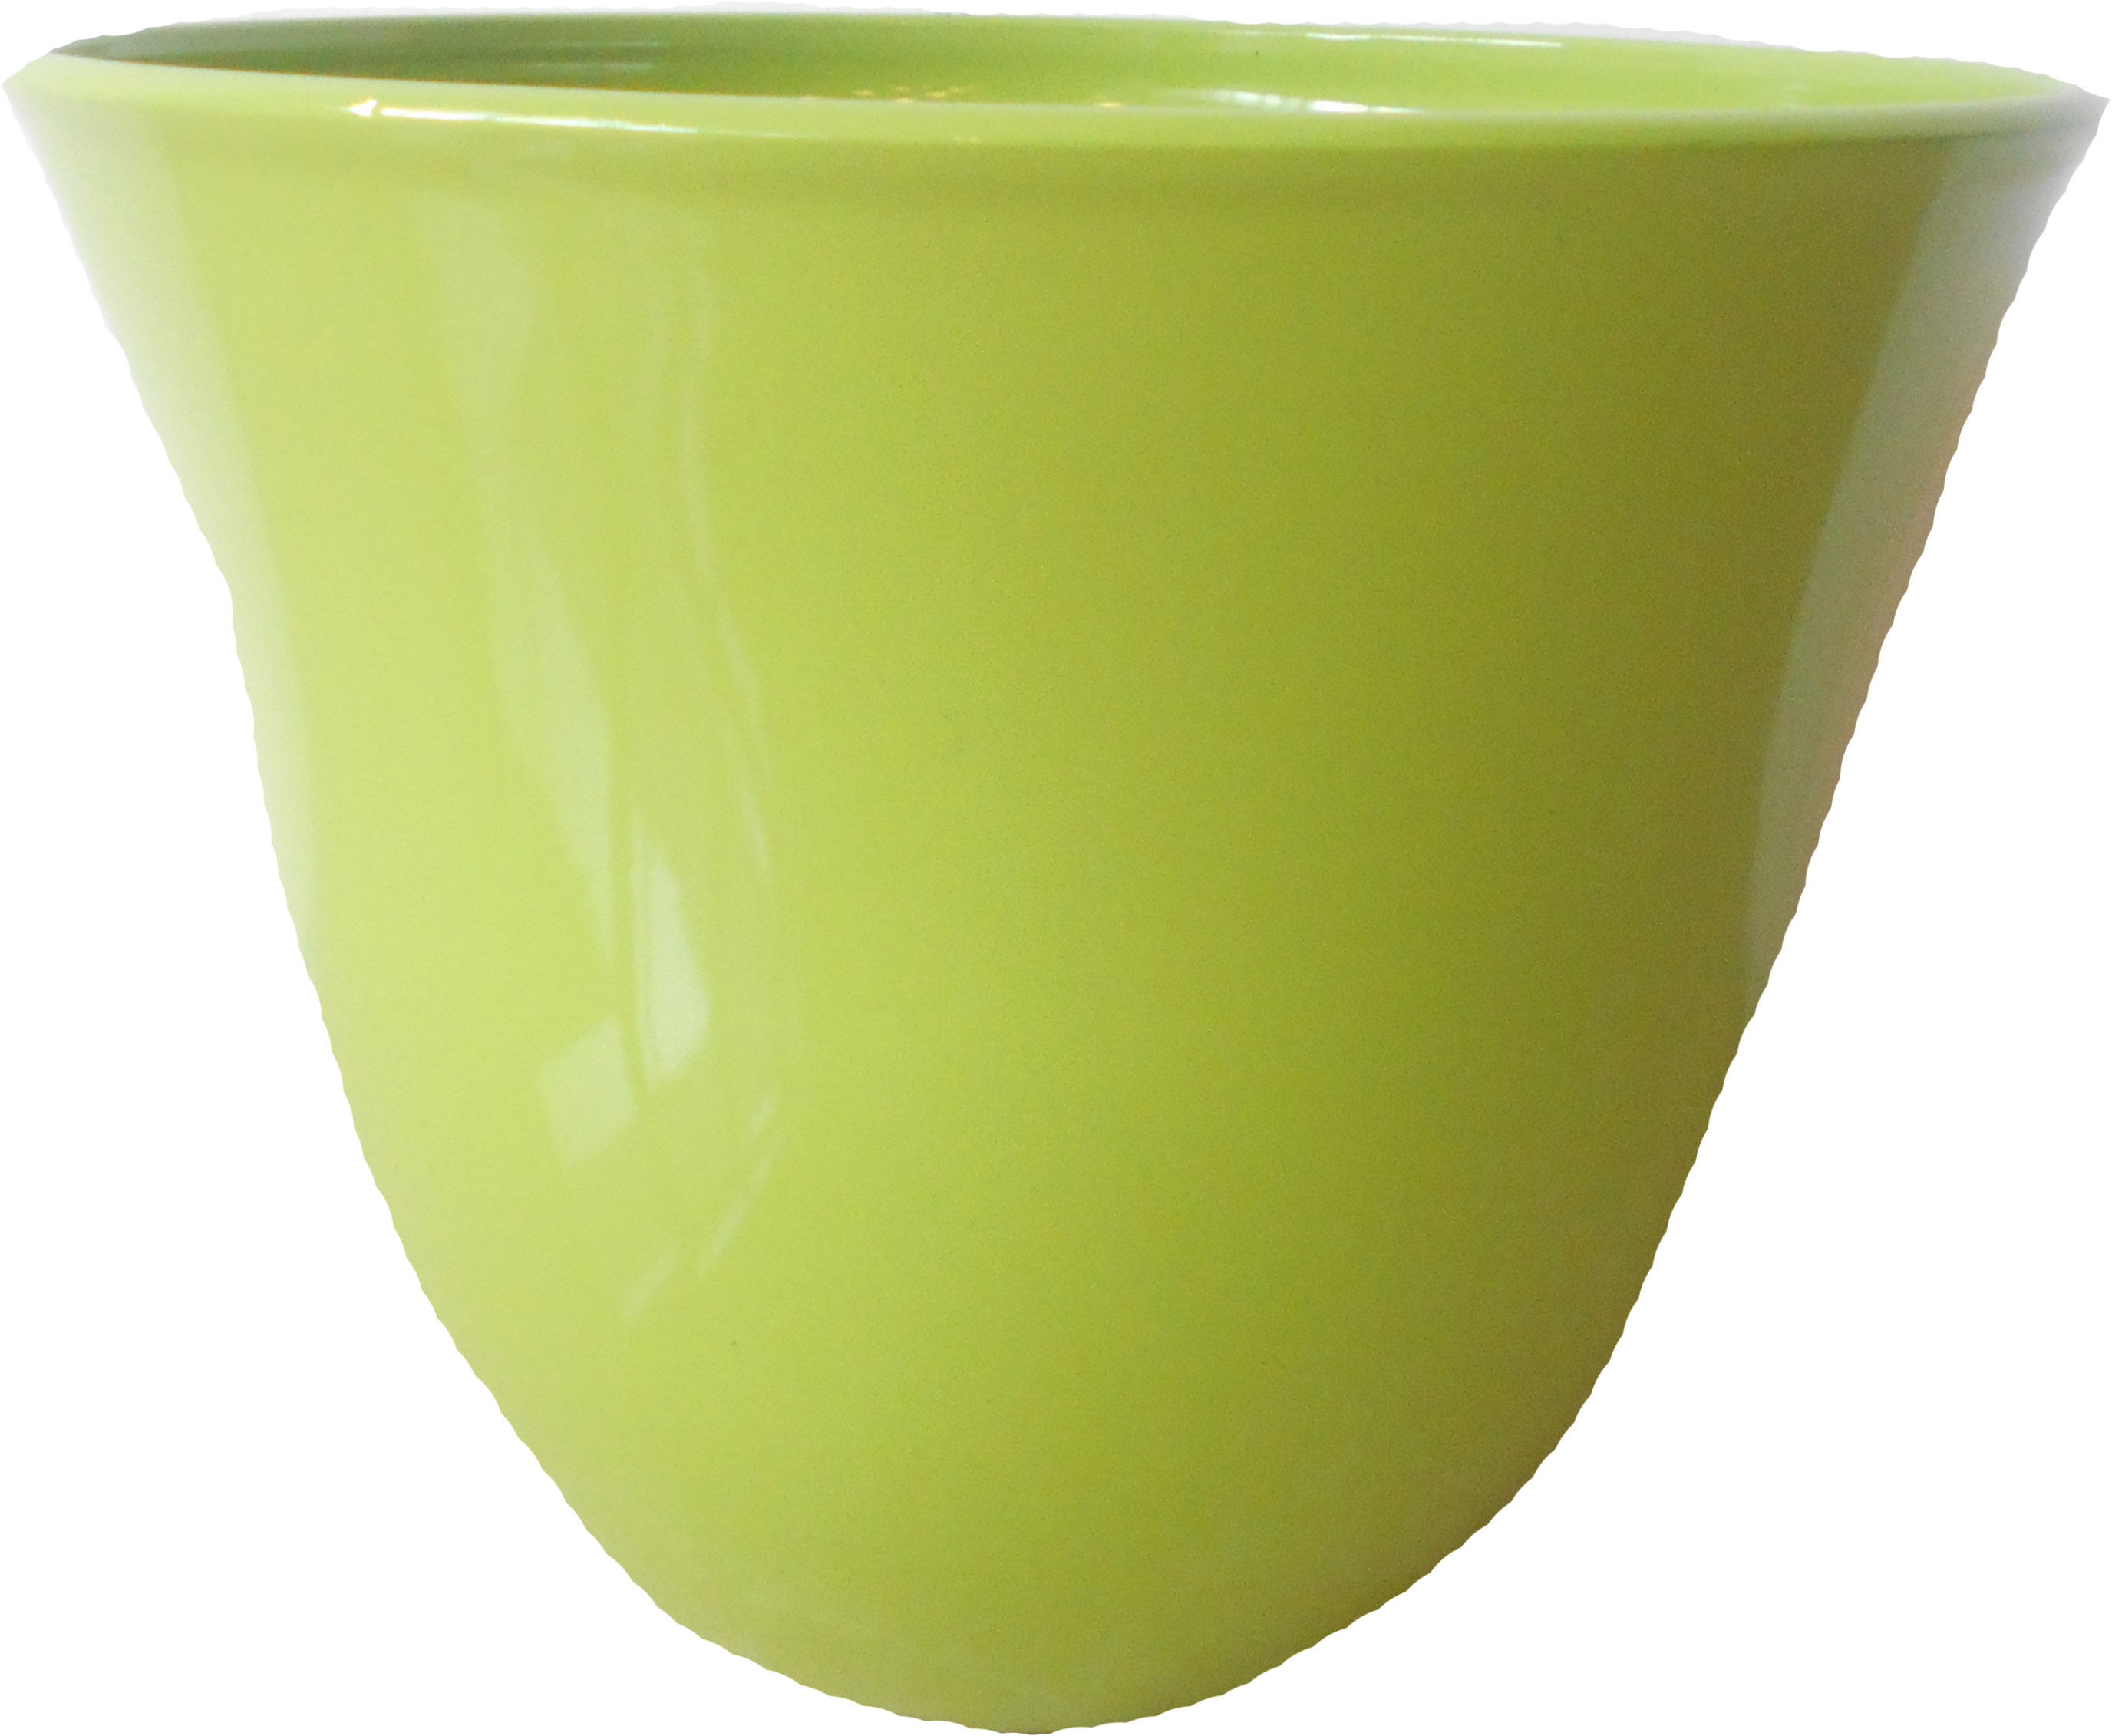 13” x 10.5” Baby Bell Planter Lime Green Gloss - 12 per case - Decorative Planters